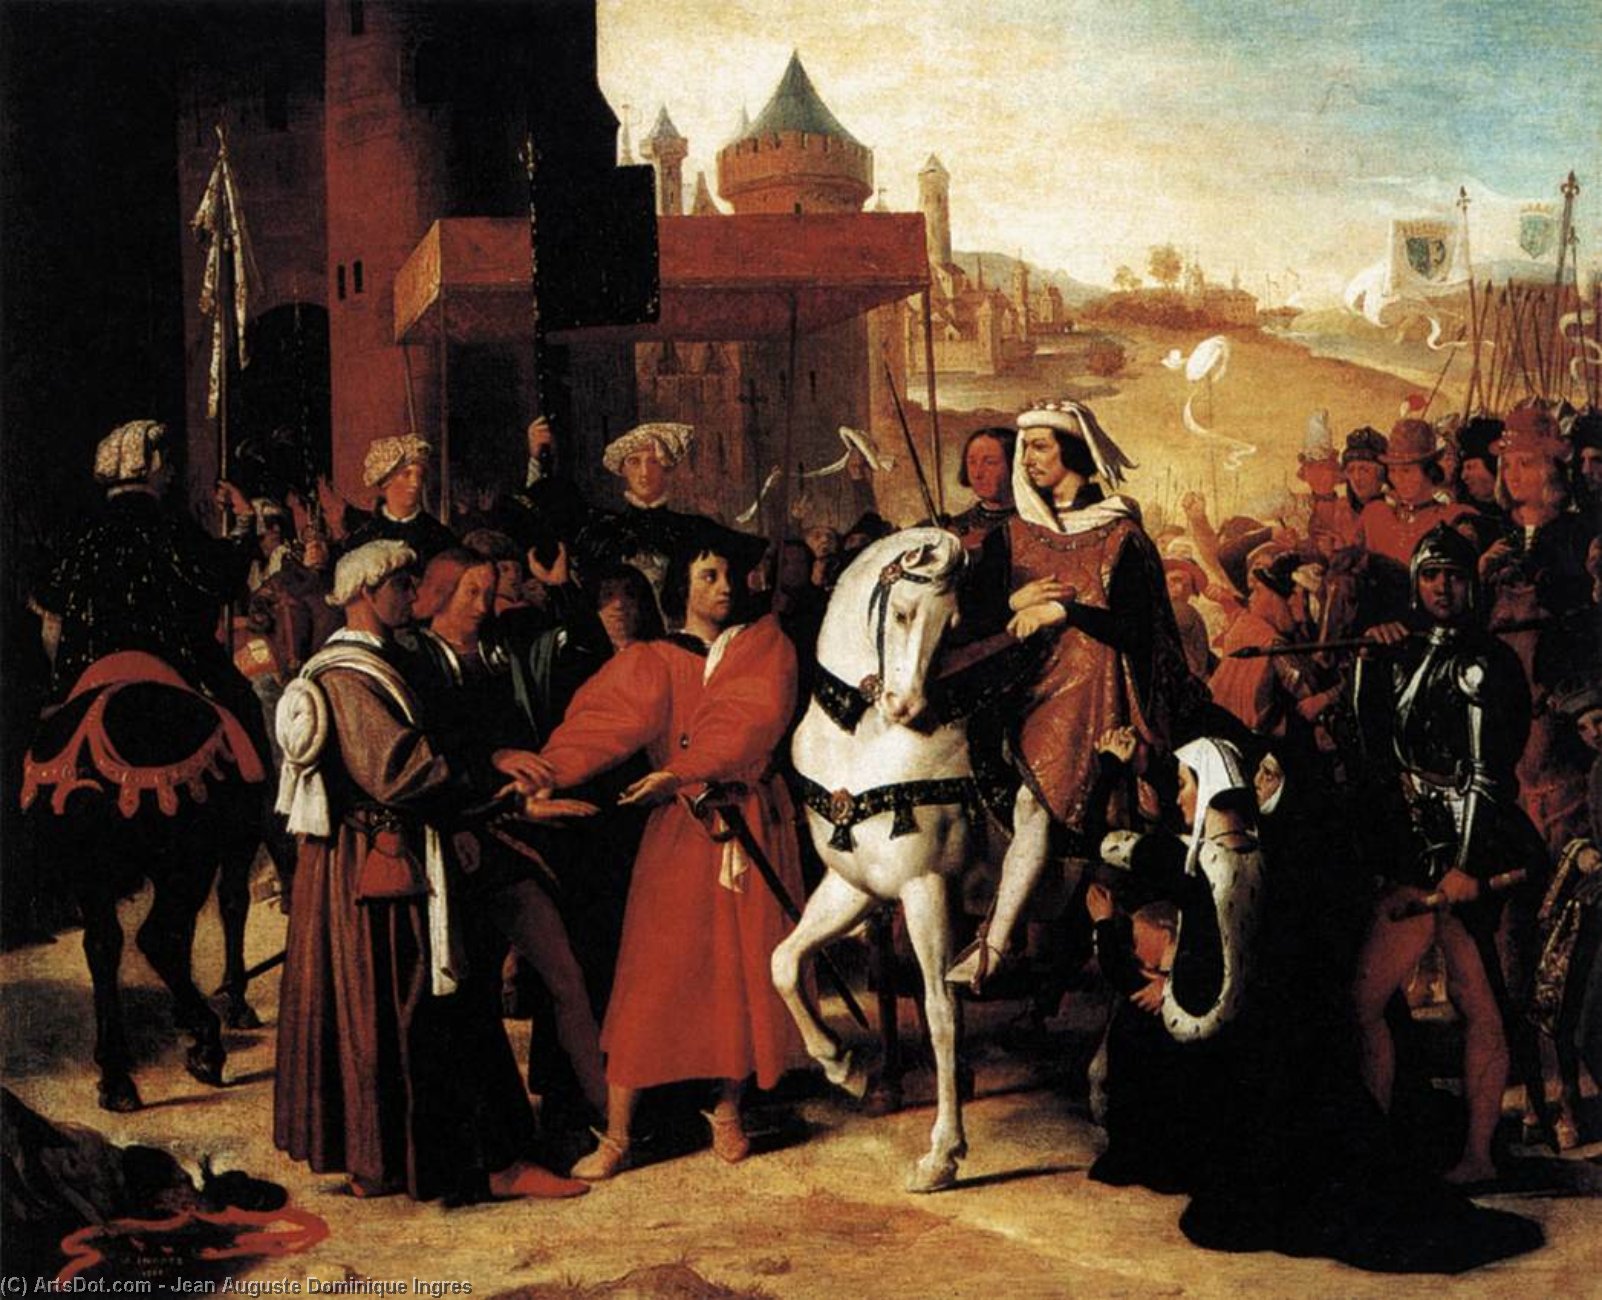 WikiOO.org - دایره المعارف هنرهای زیبا - نقاشی، آثار هنری Jean Auguste Dominique Ingres - The Entry of the Future Charles V into Paris in 1358